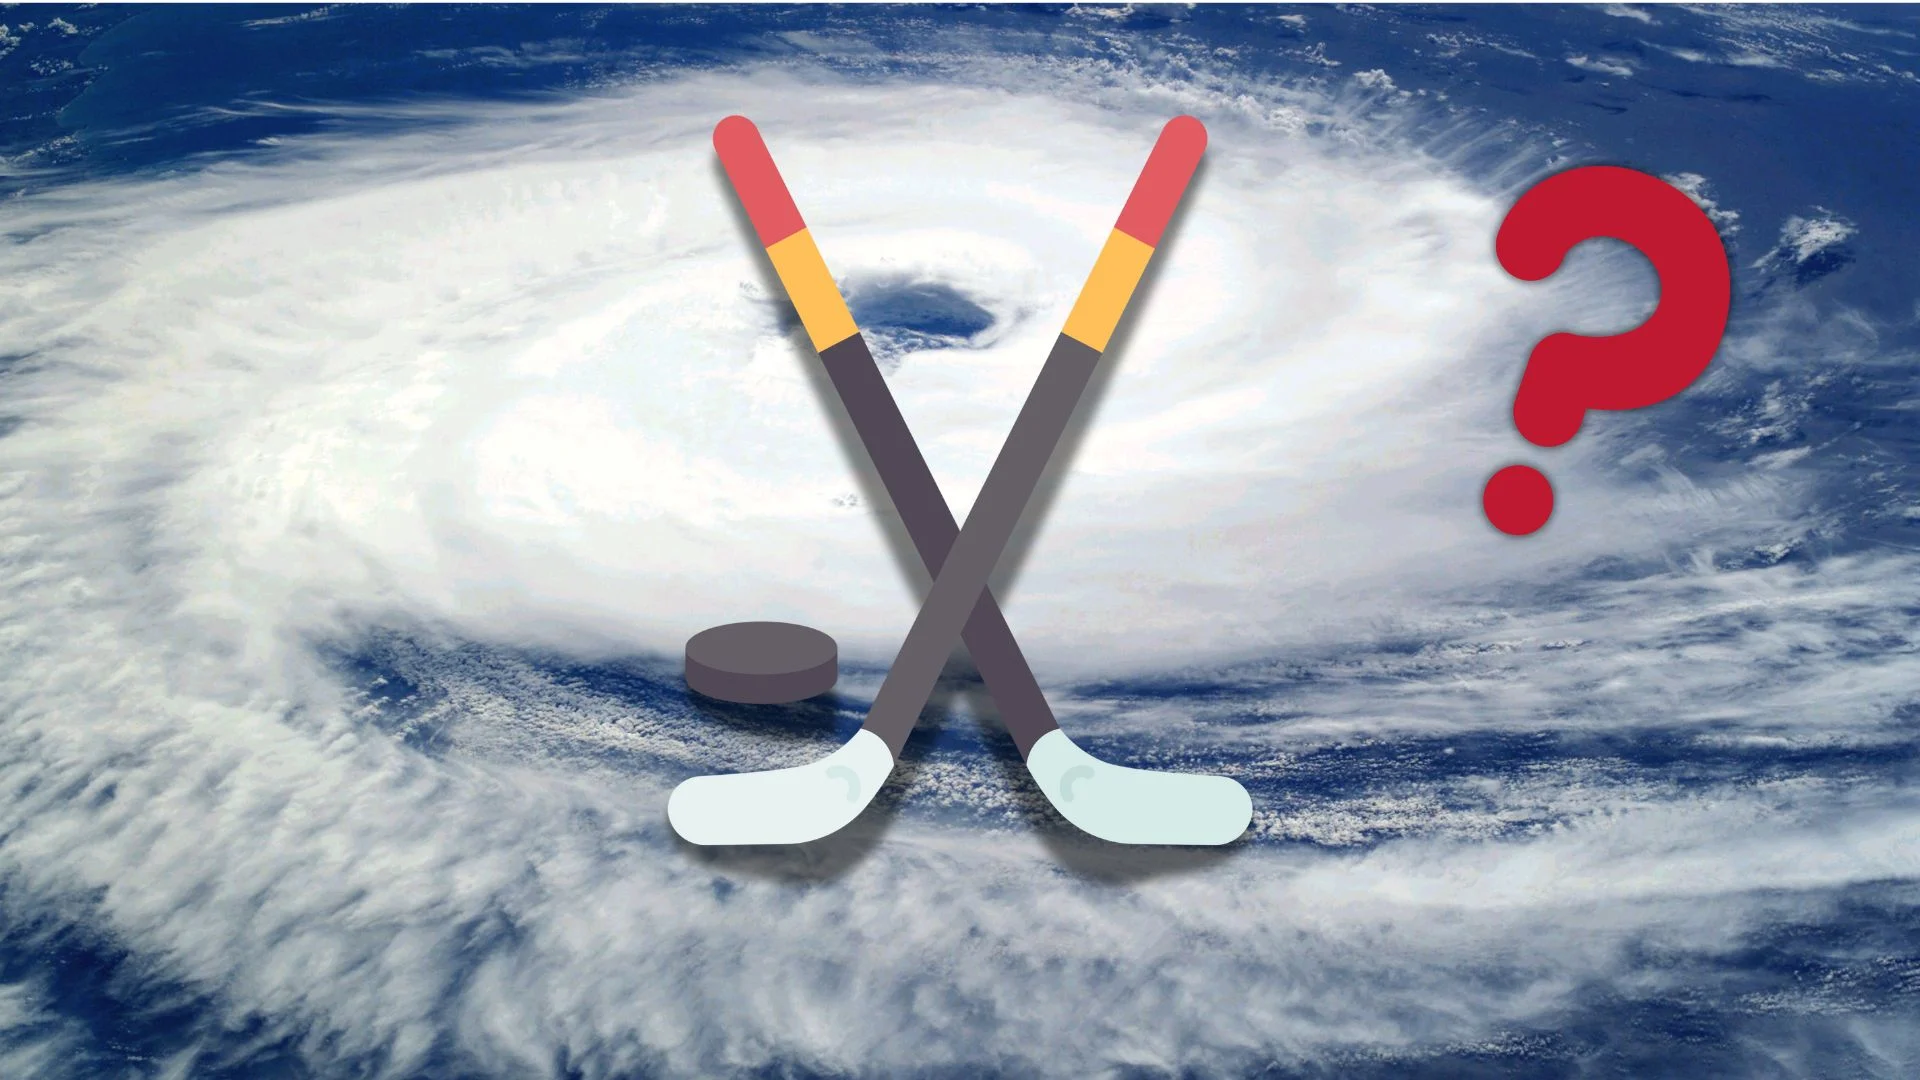 Hurricane season meets the Stanley Cup finals. Is the series at risk this year? See what we're watching, here